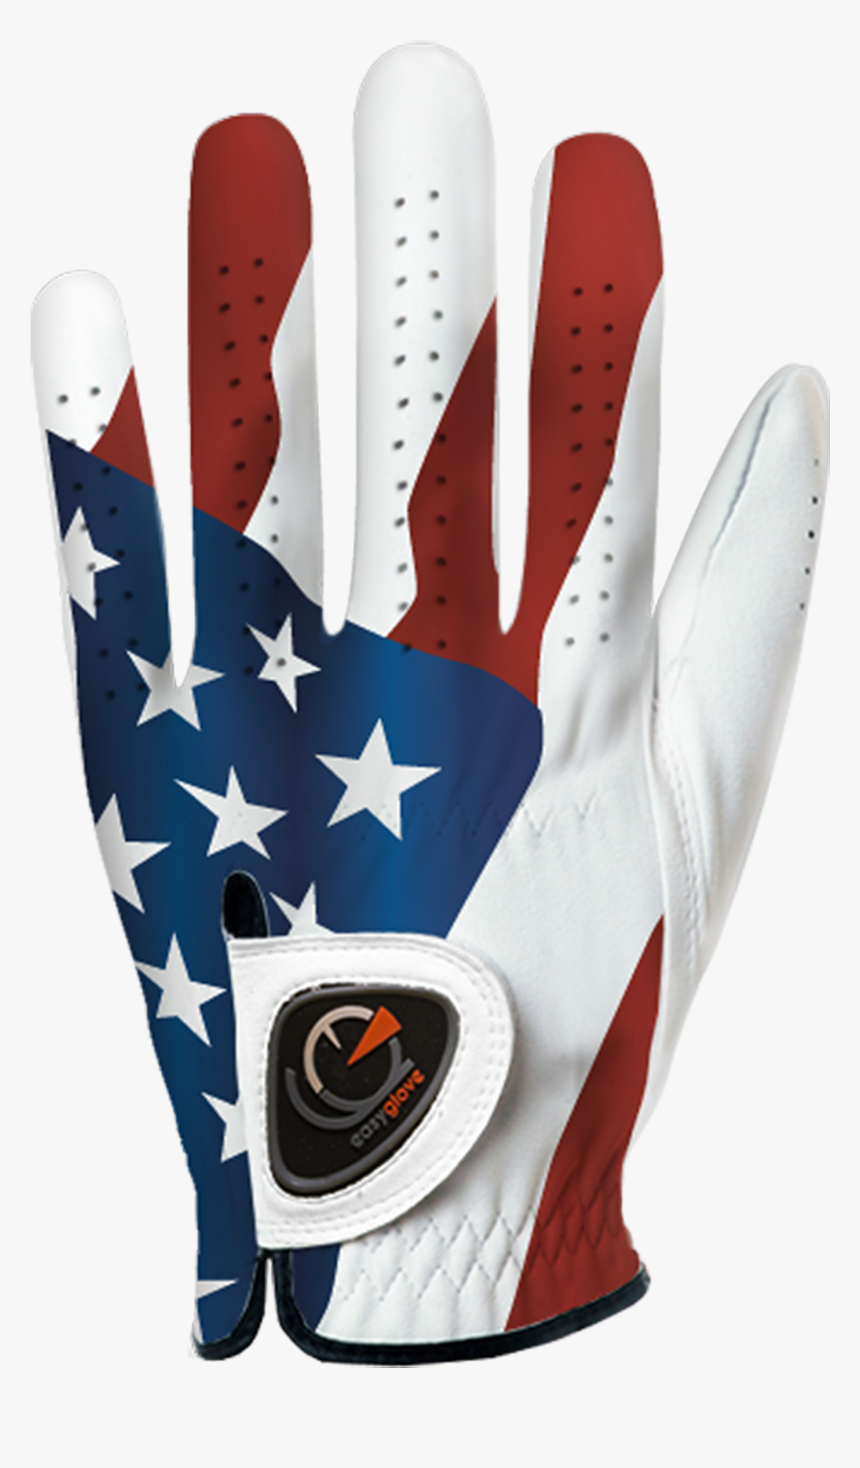 Usa Glove-1 - Golf Gloves Usa, HD Png Download, Free Download